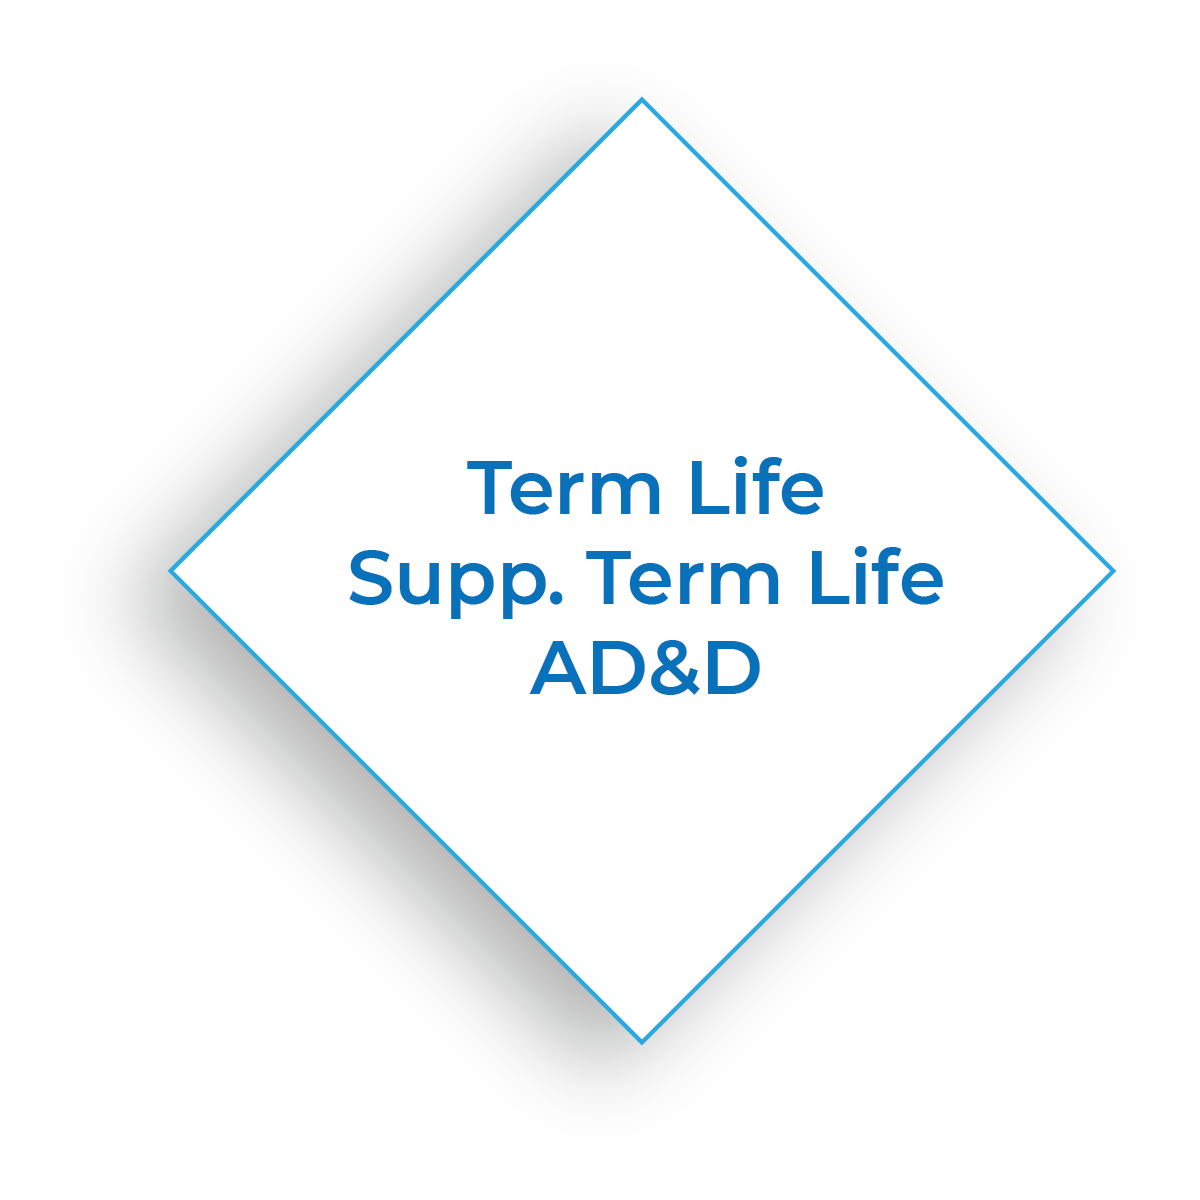 Term Life Supp. - Benefits - Bankers Cooperative Group